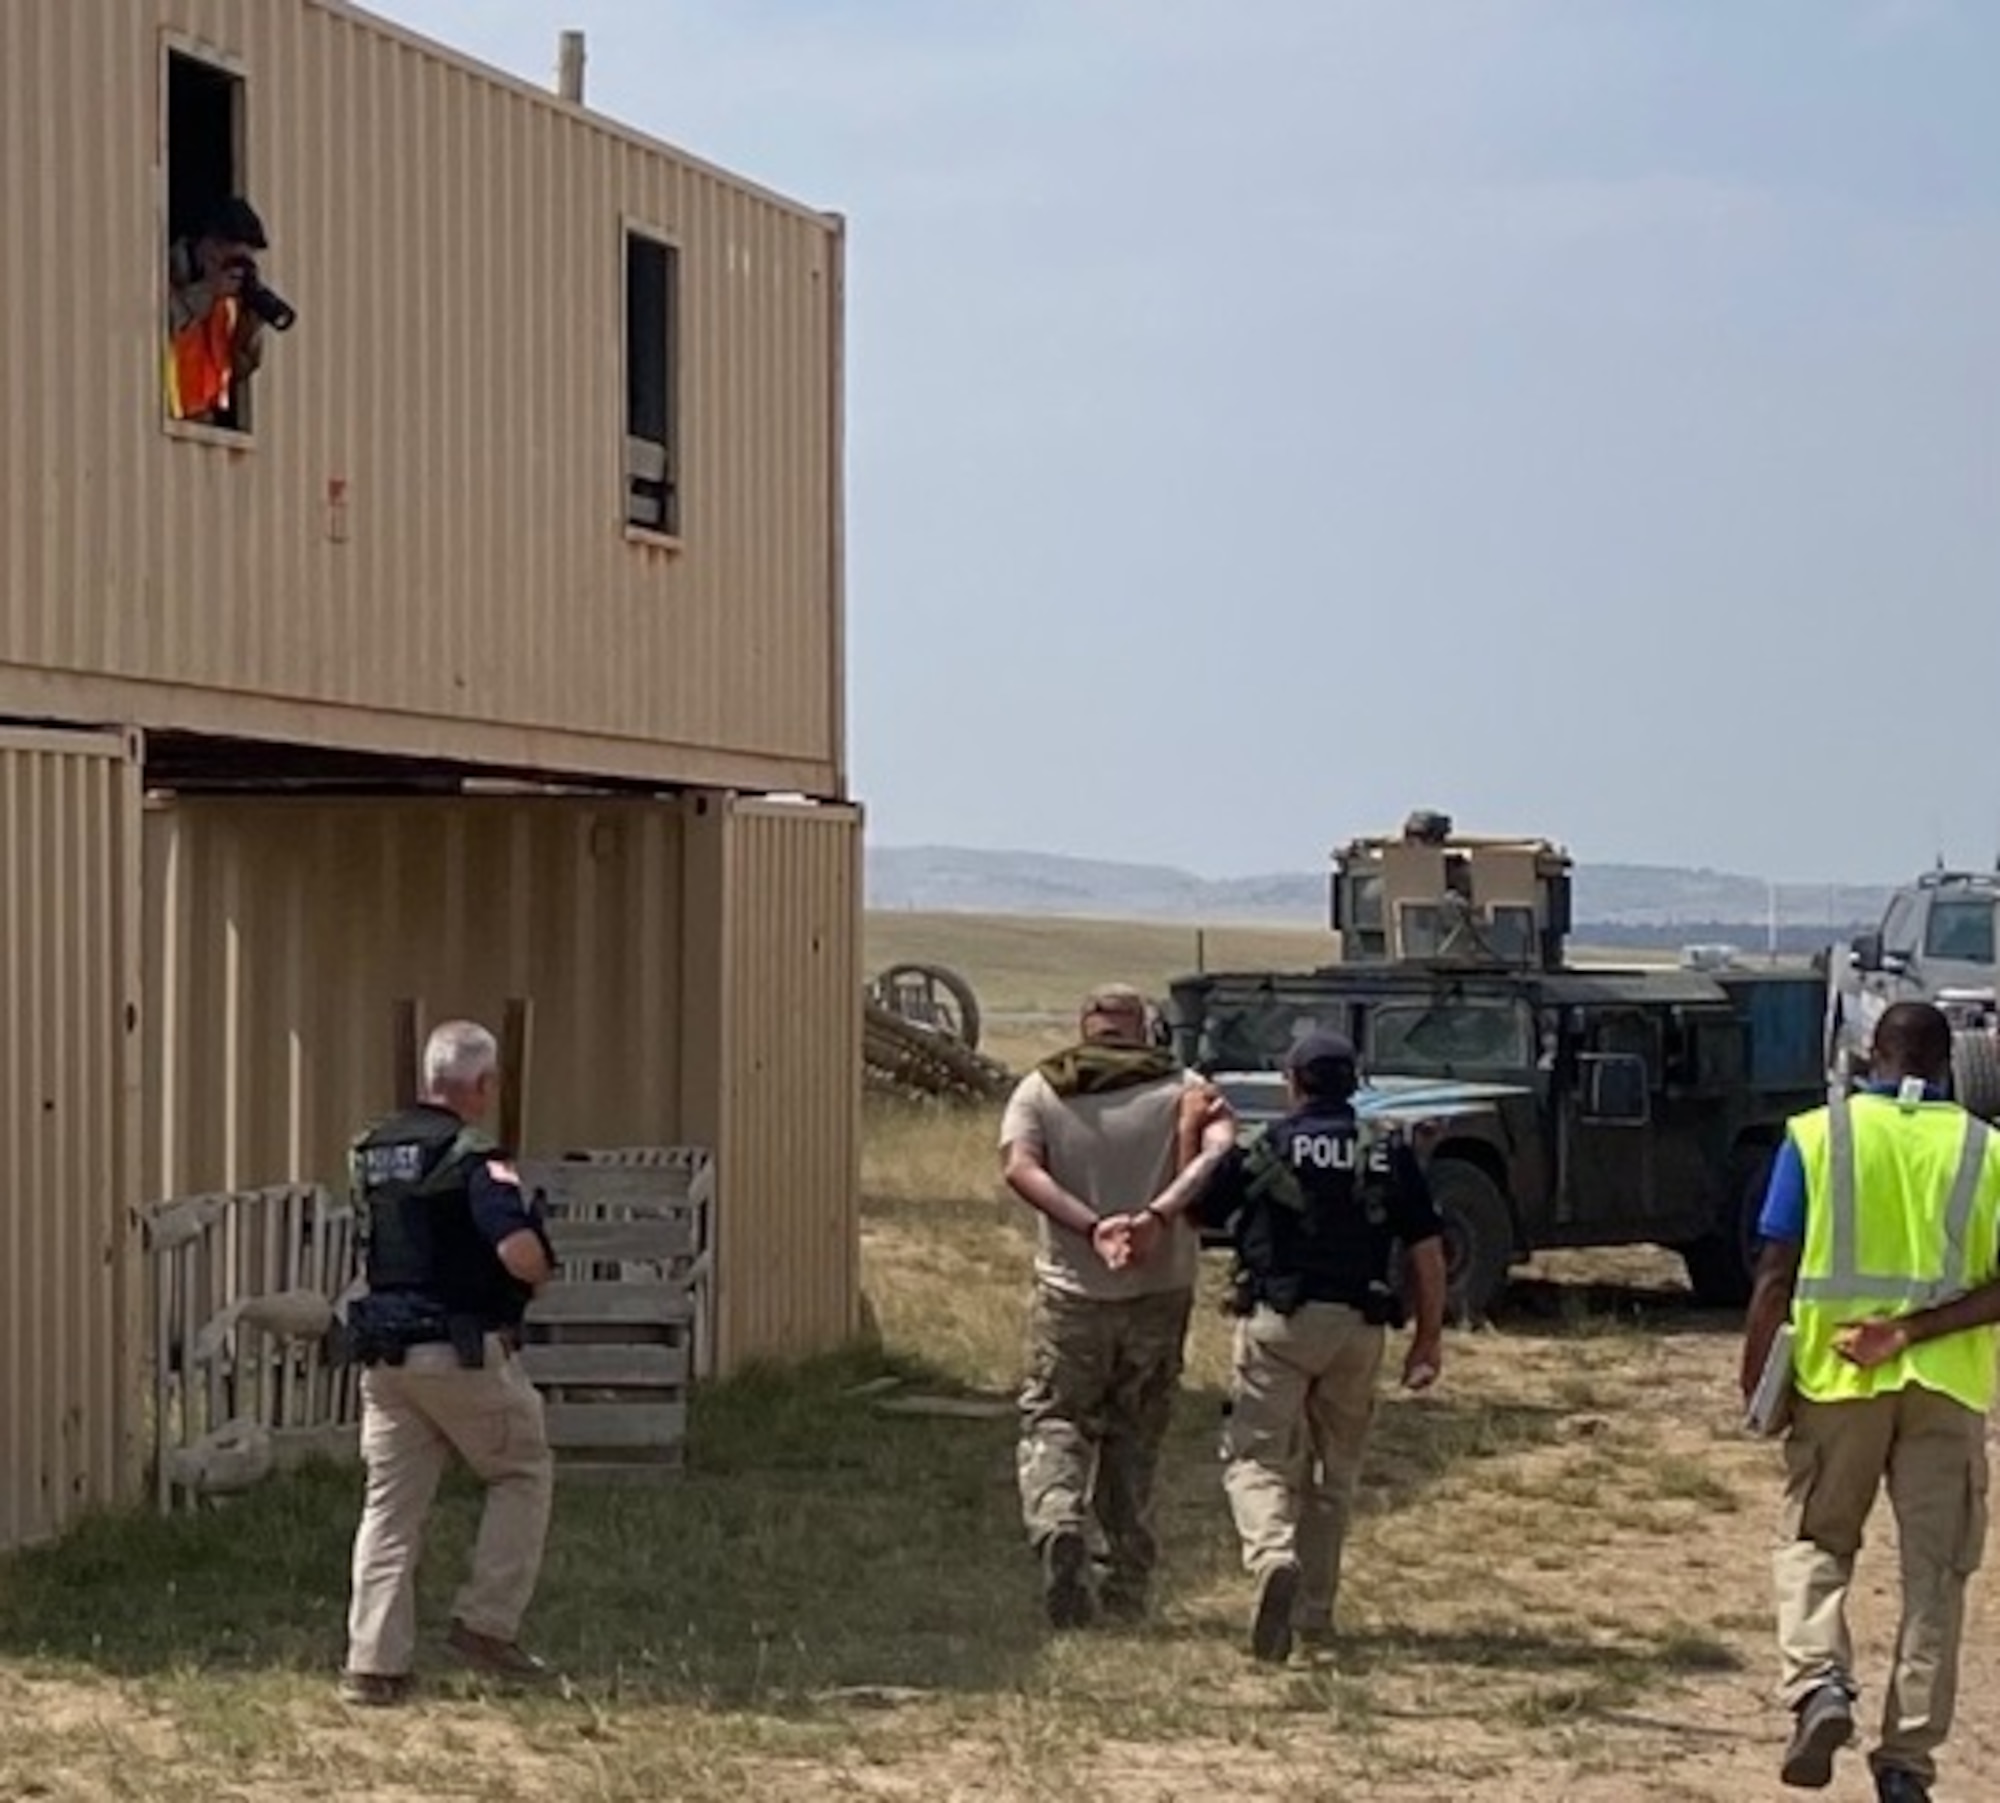 Office of Special Investigations Nuclear Convoy Support Agents from Field Investigations Region 8, arrest a hostile "terrorist" and lead him to the FBI, while a photographer documents the scenario during the Air Force Global Strike Command’s Road Warrior Exercise at Camp Guernsey, Wyo., Aug. 9-20, 2021. (Photo by Col. Seth Miller, 8 FIR/CC)